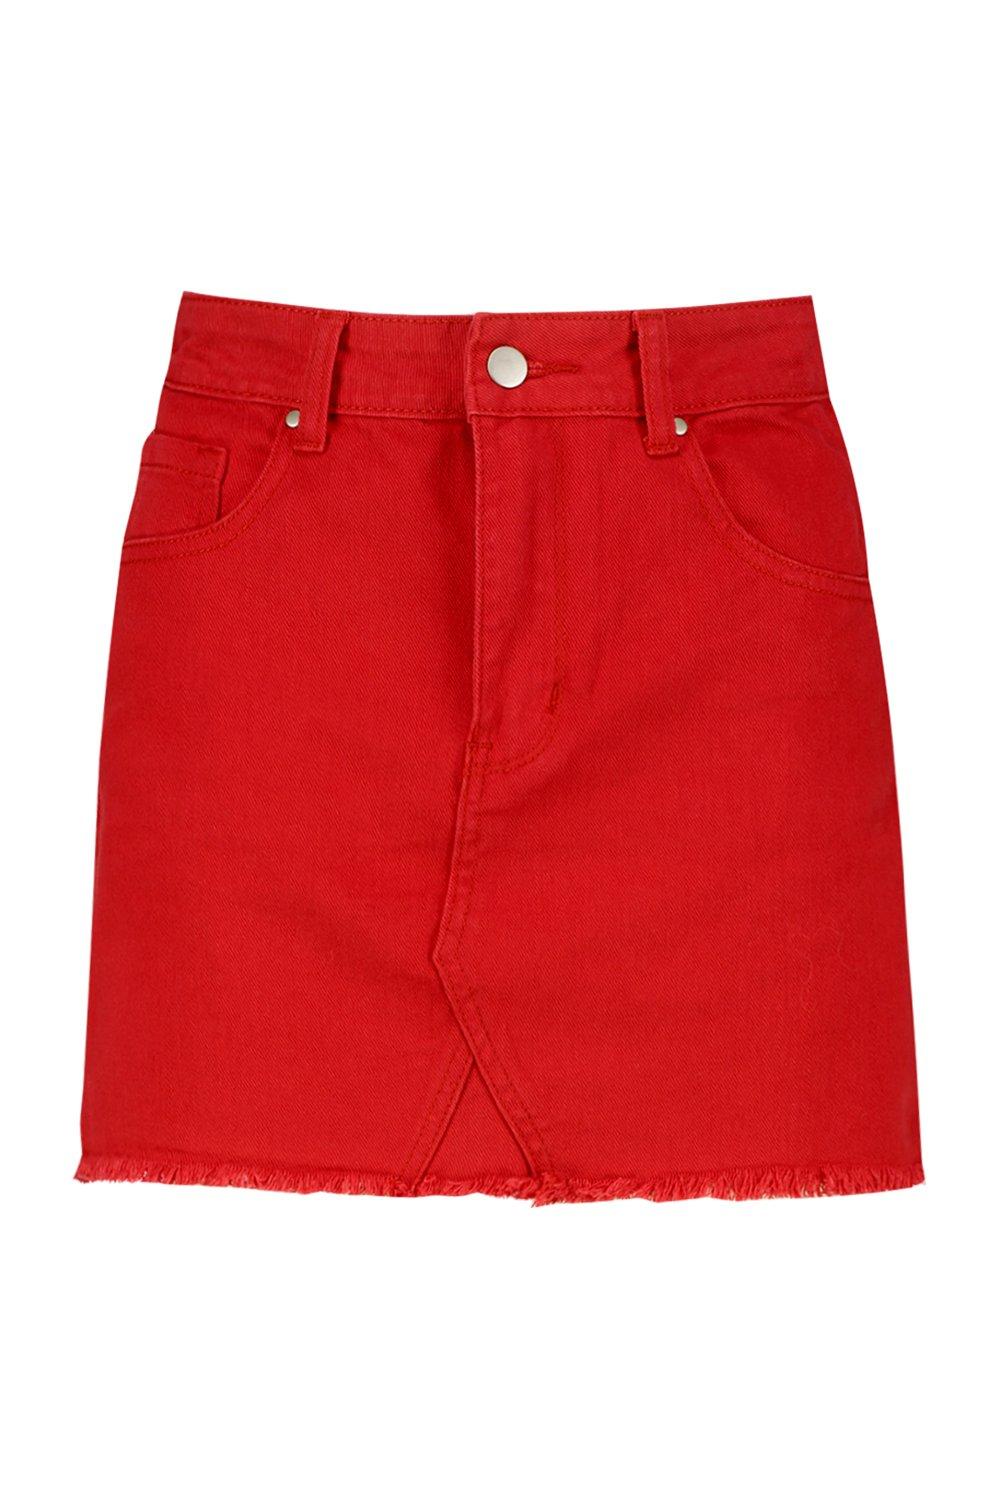 red jeans skirt